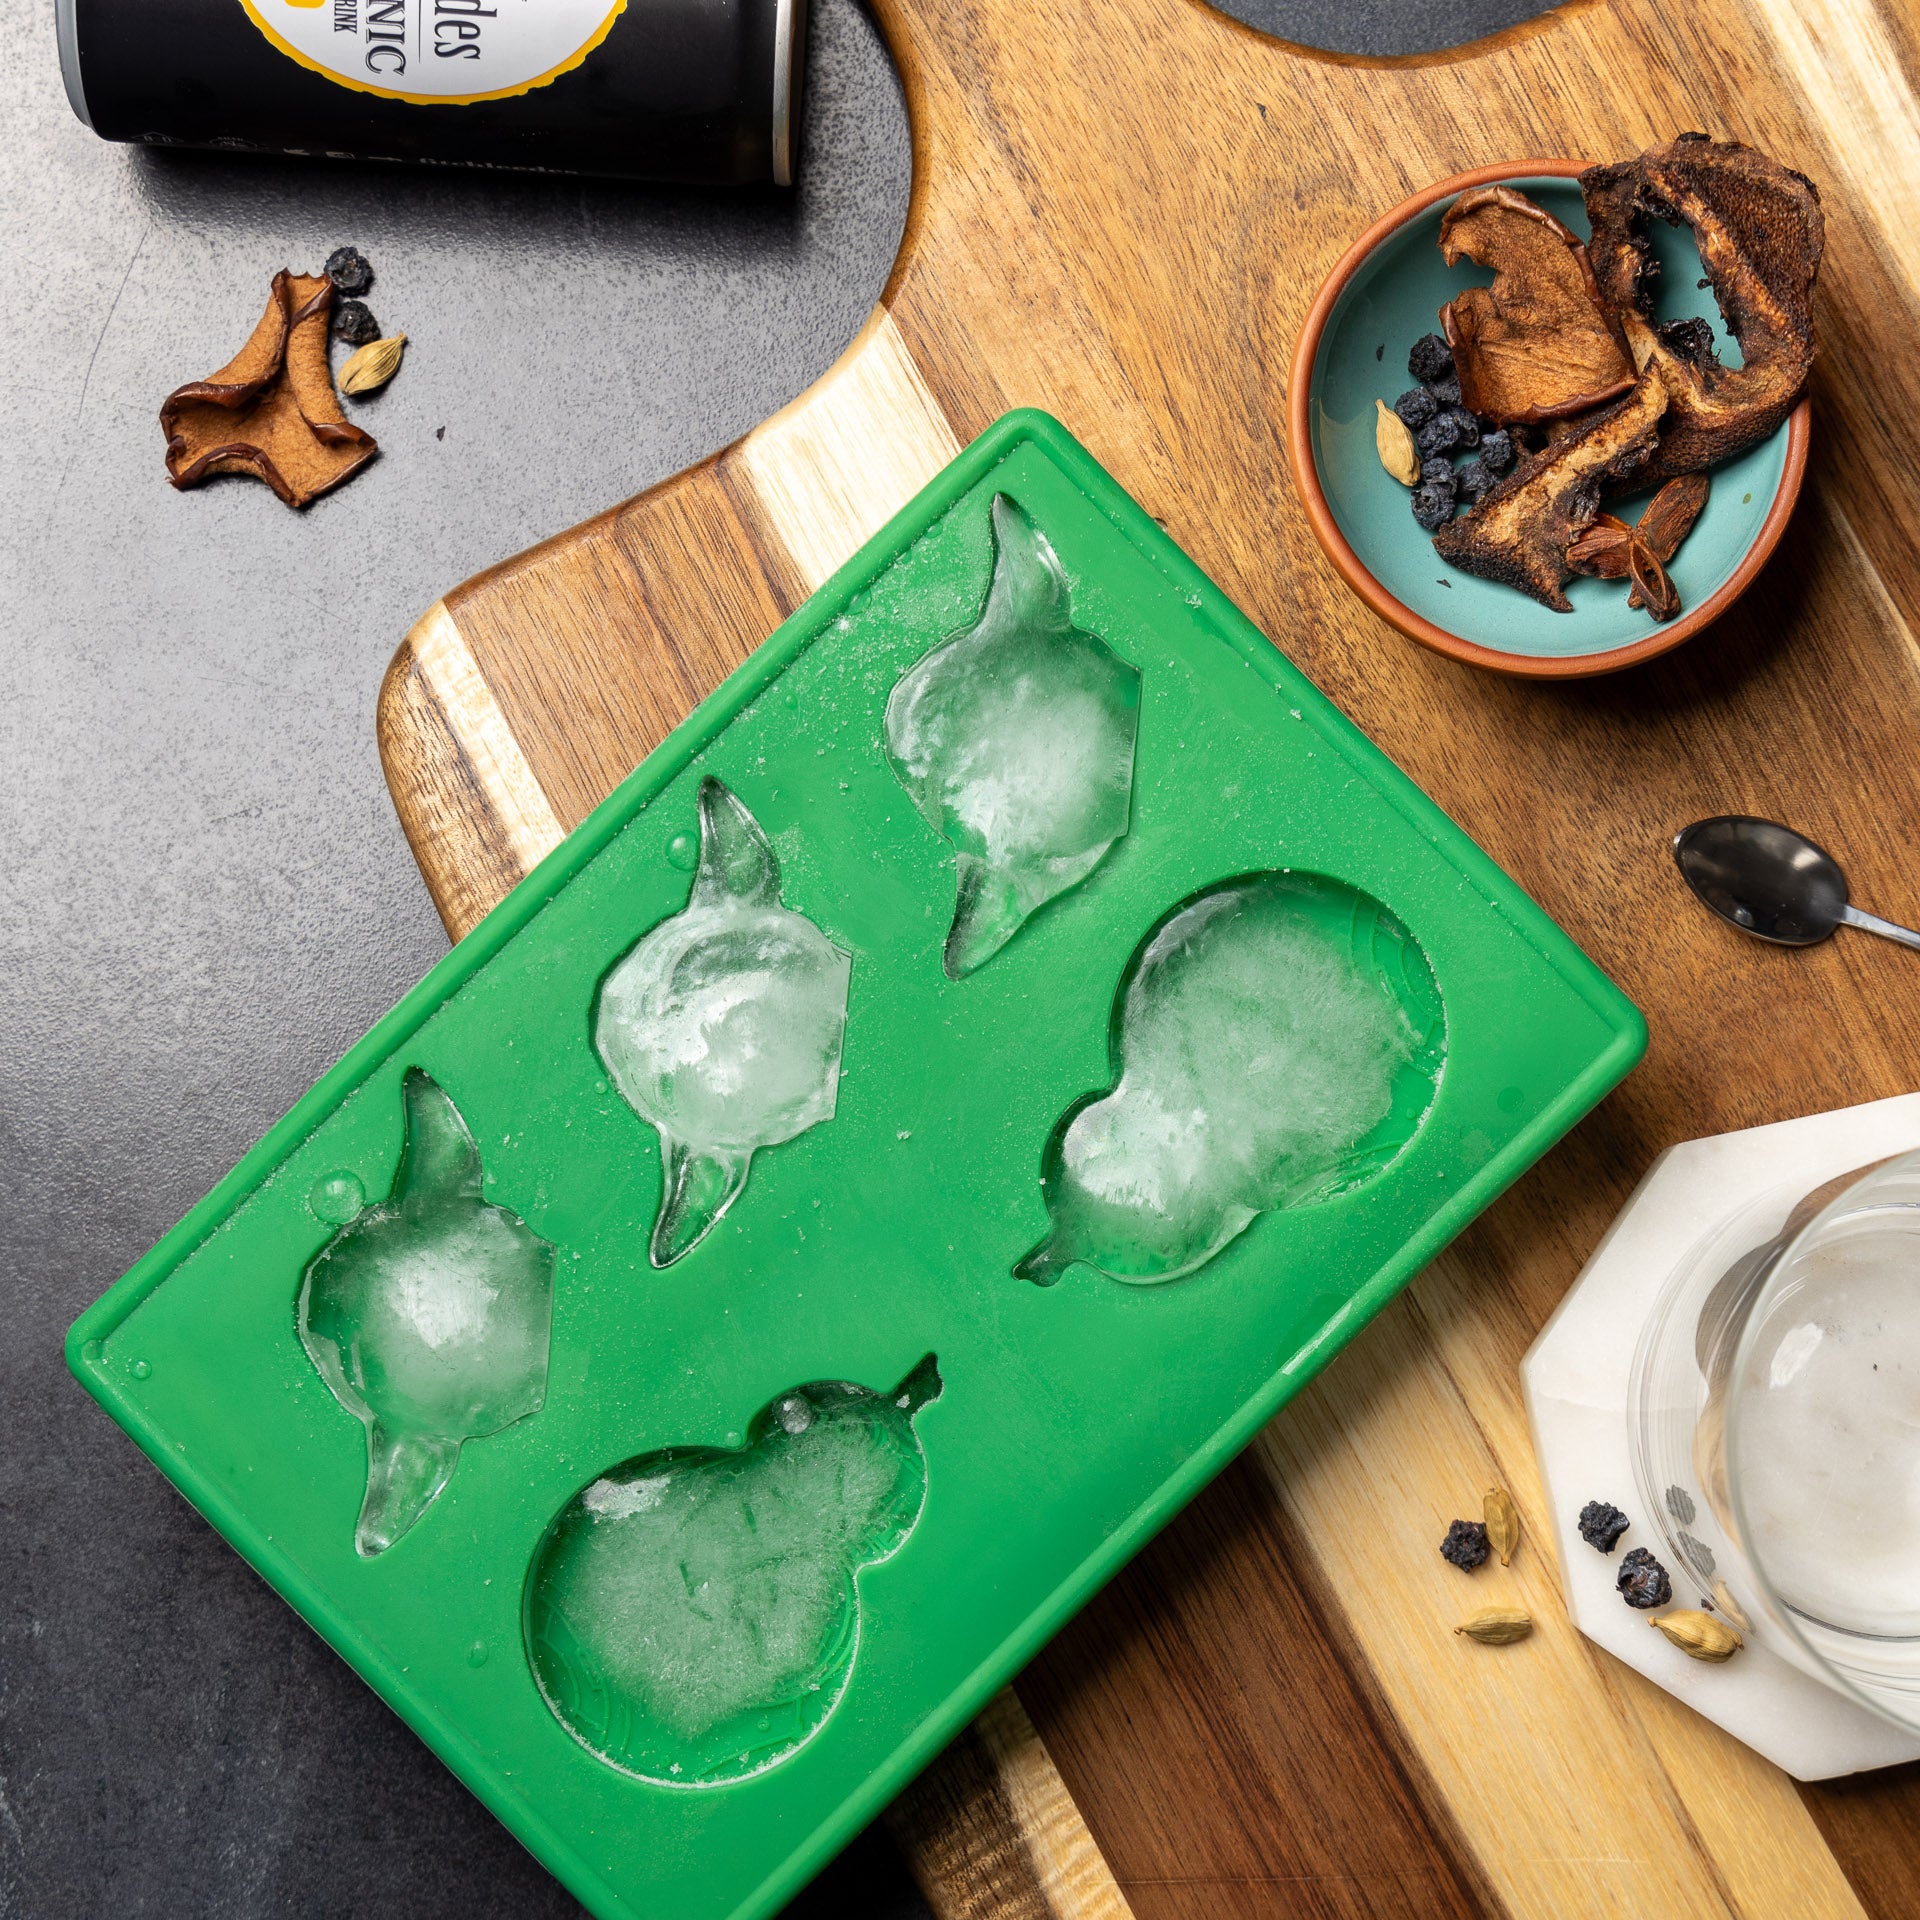 Star Wars Themed Ice Moulds